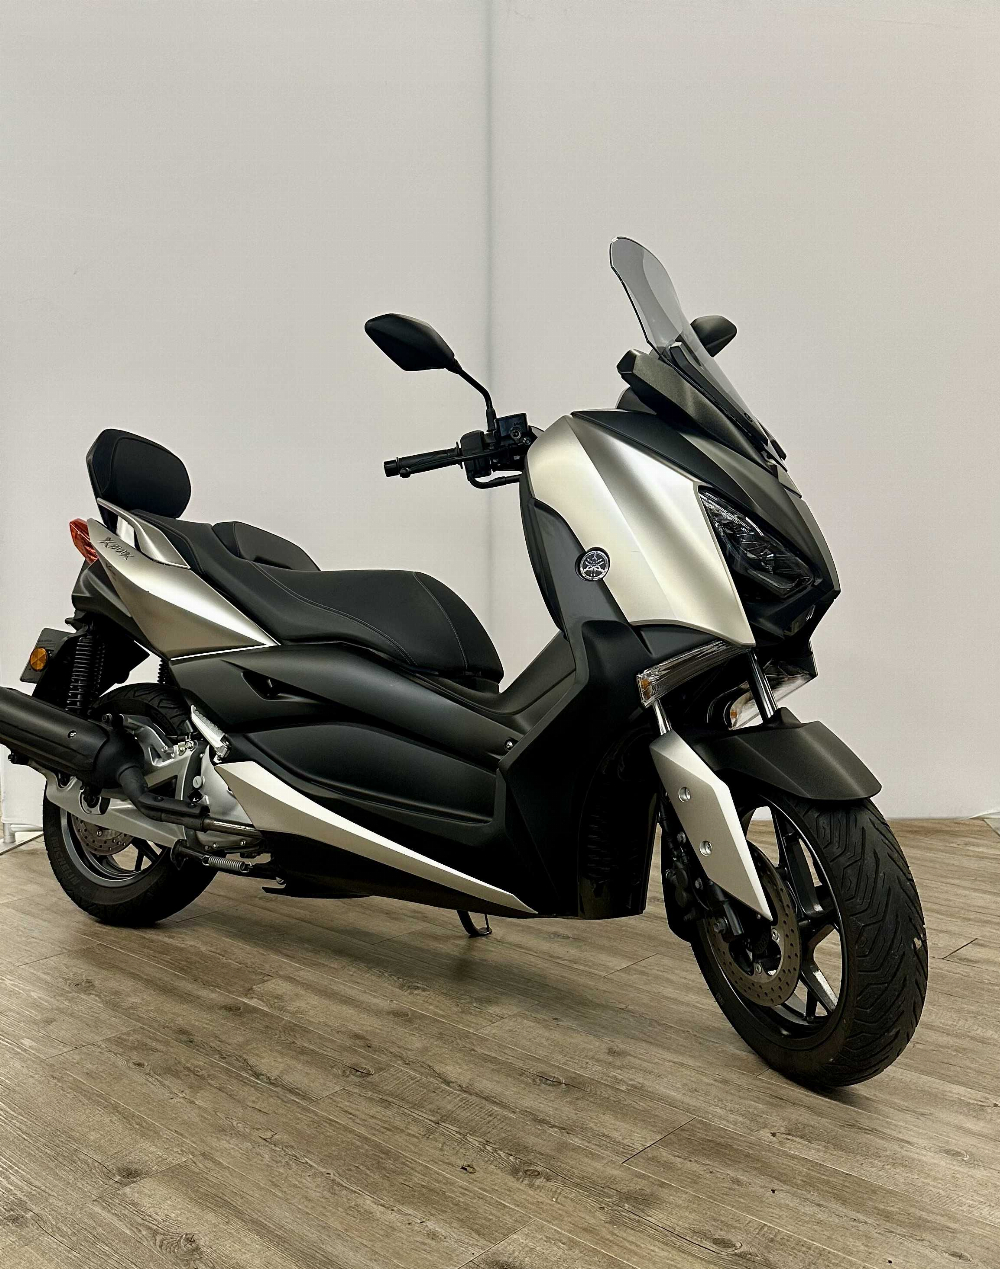 Yamaha YP 125 R X-Max ABS 2019 vue 3/4 droite